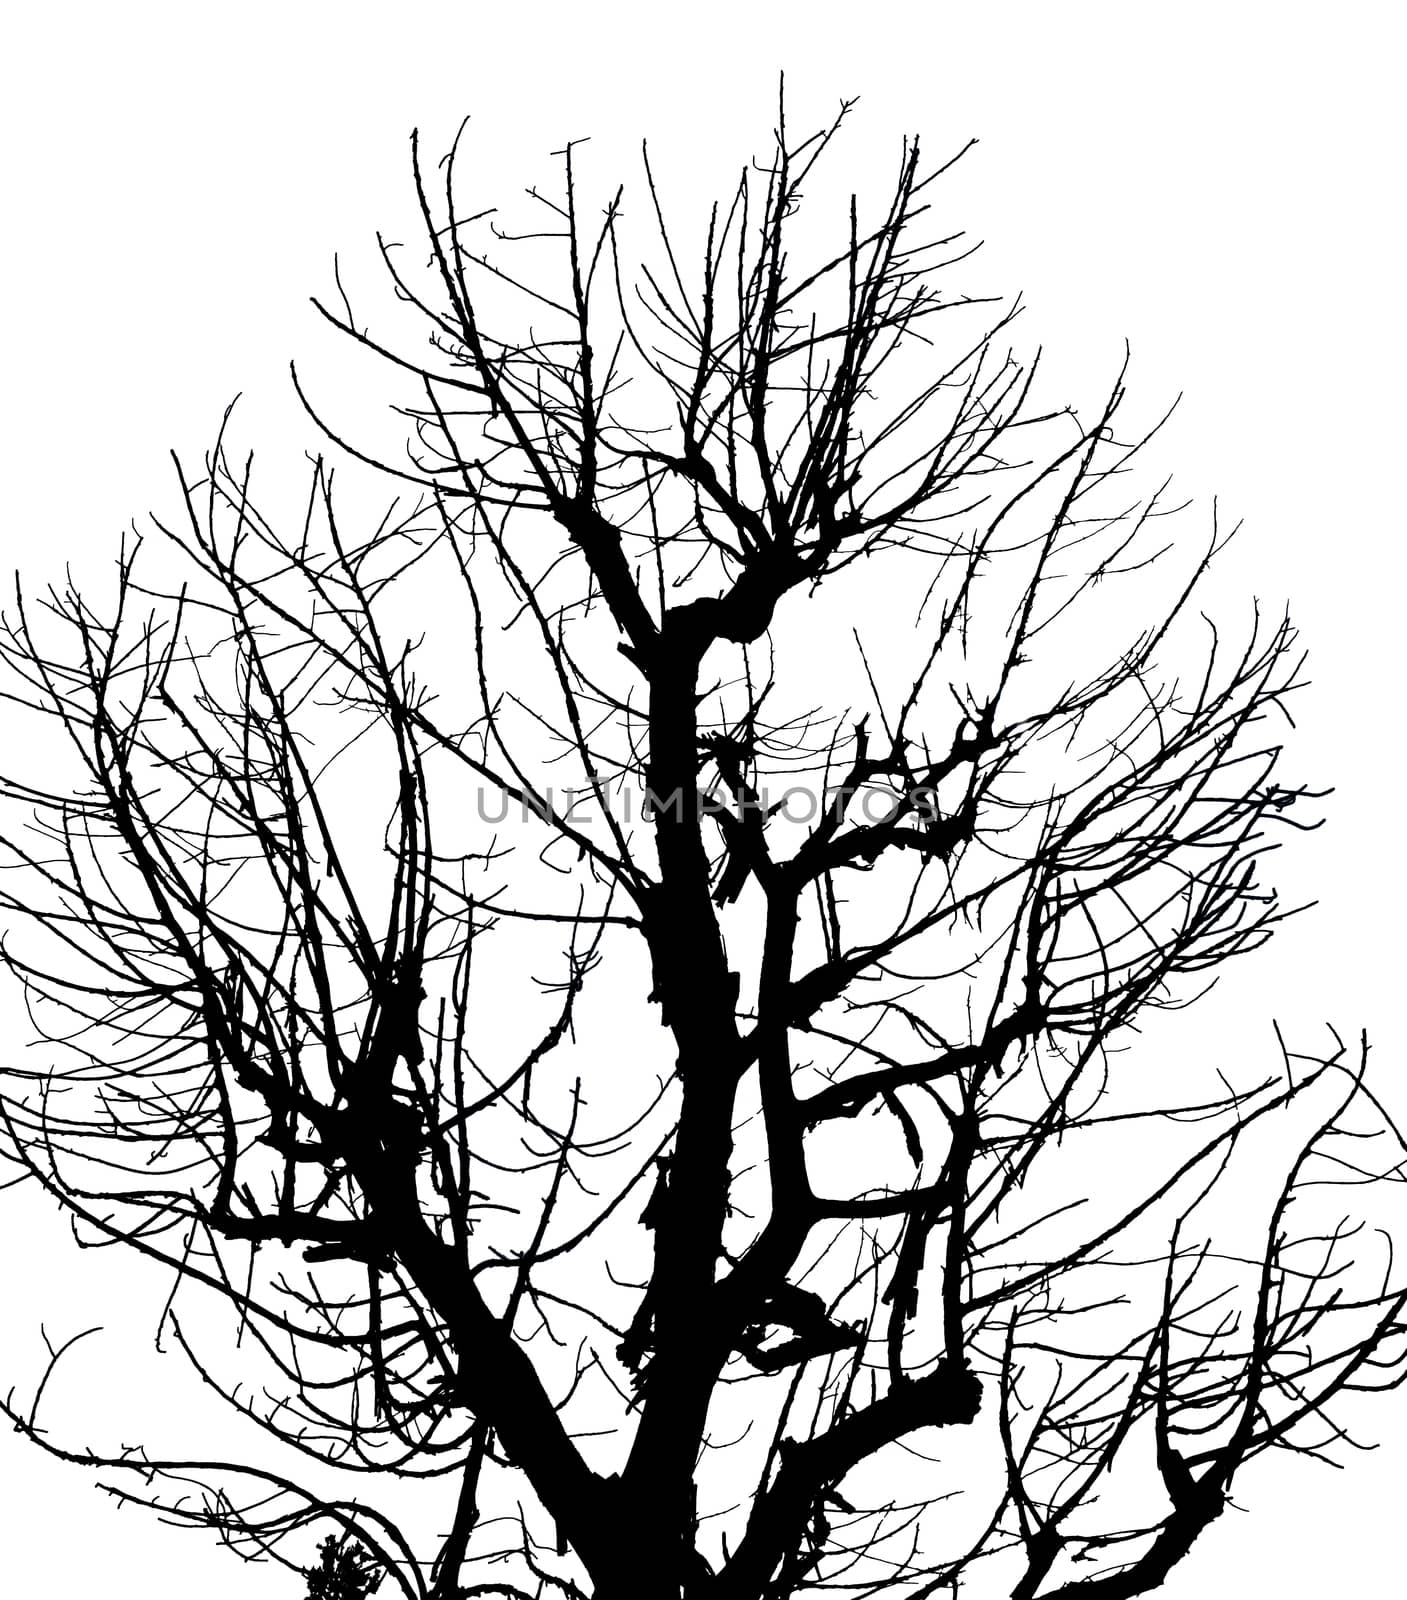 Silhouette Dead Tree on Isolated White Background by kobfujar